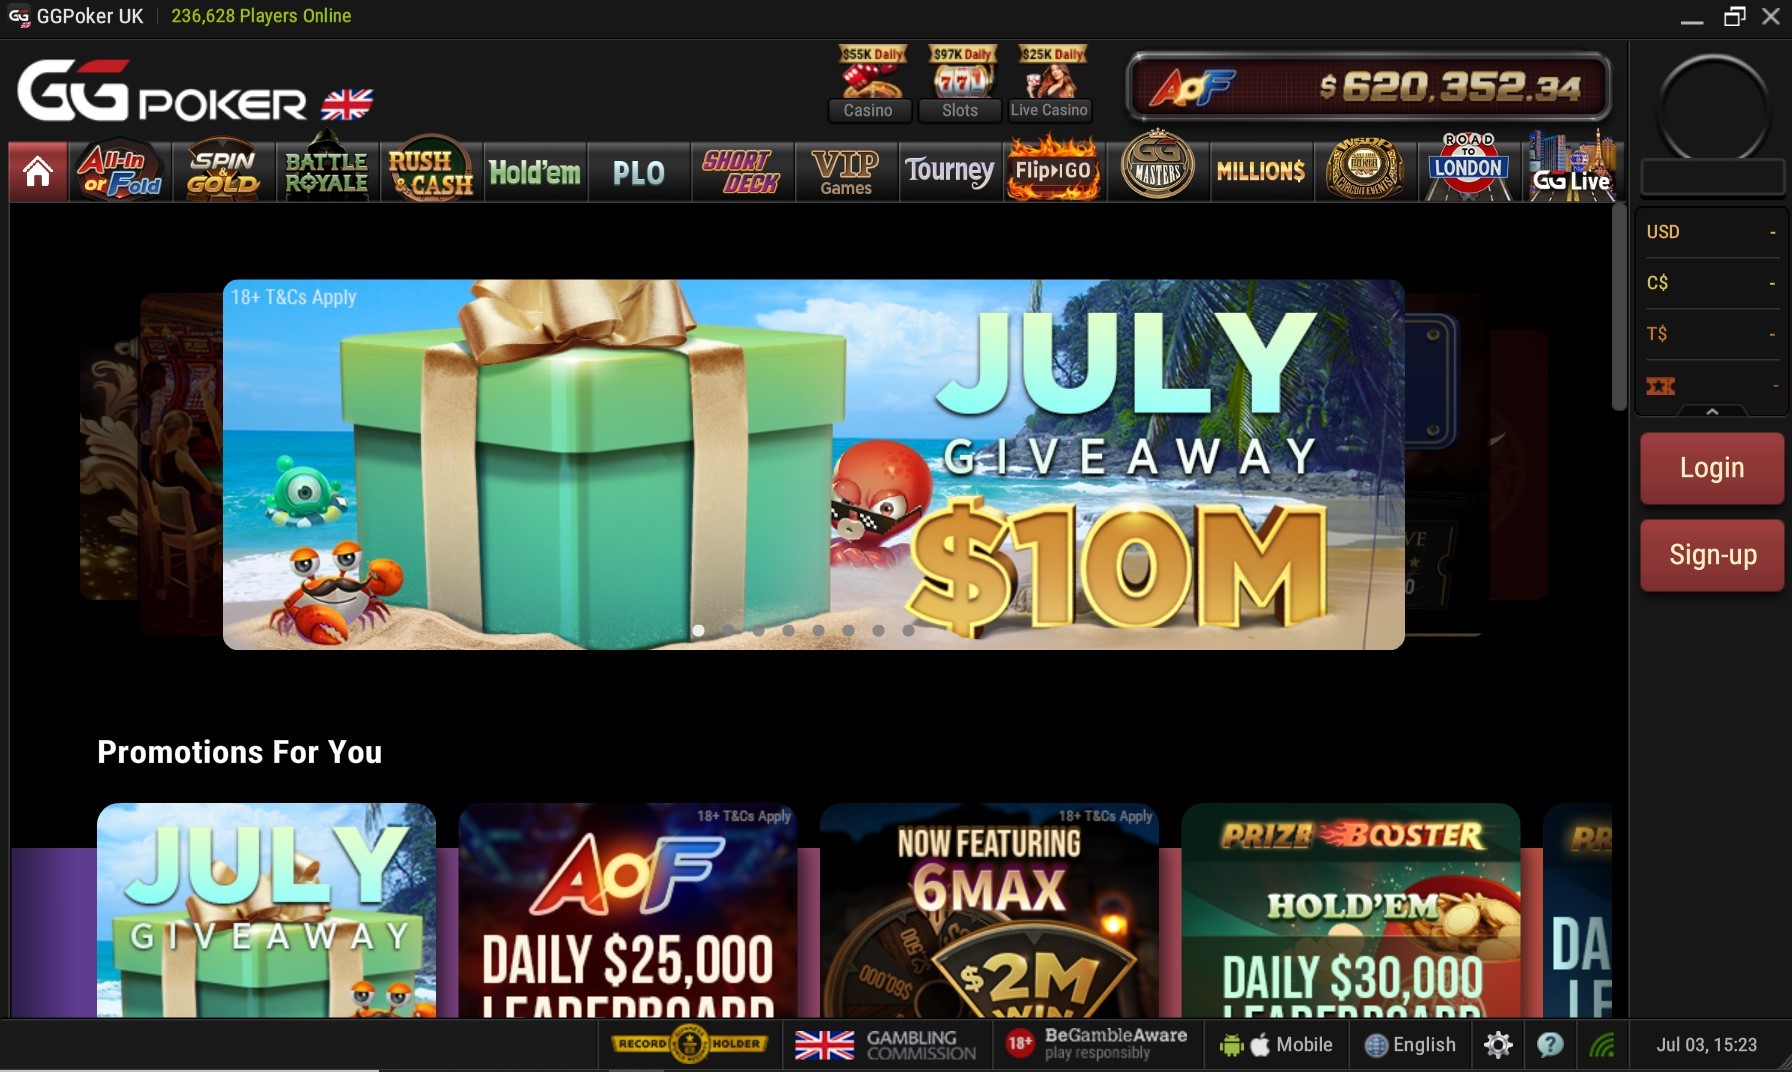 A view of the GGPoker lobby, running on its downloadable desktop client